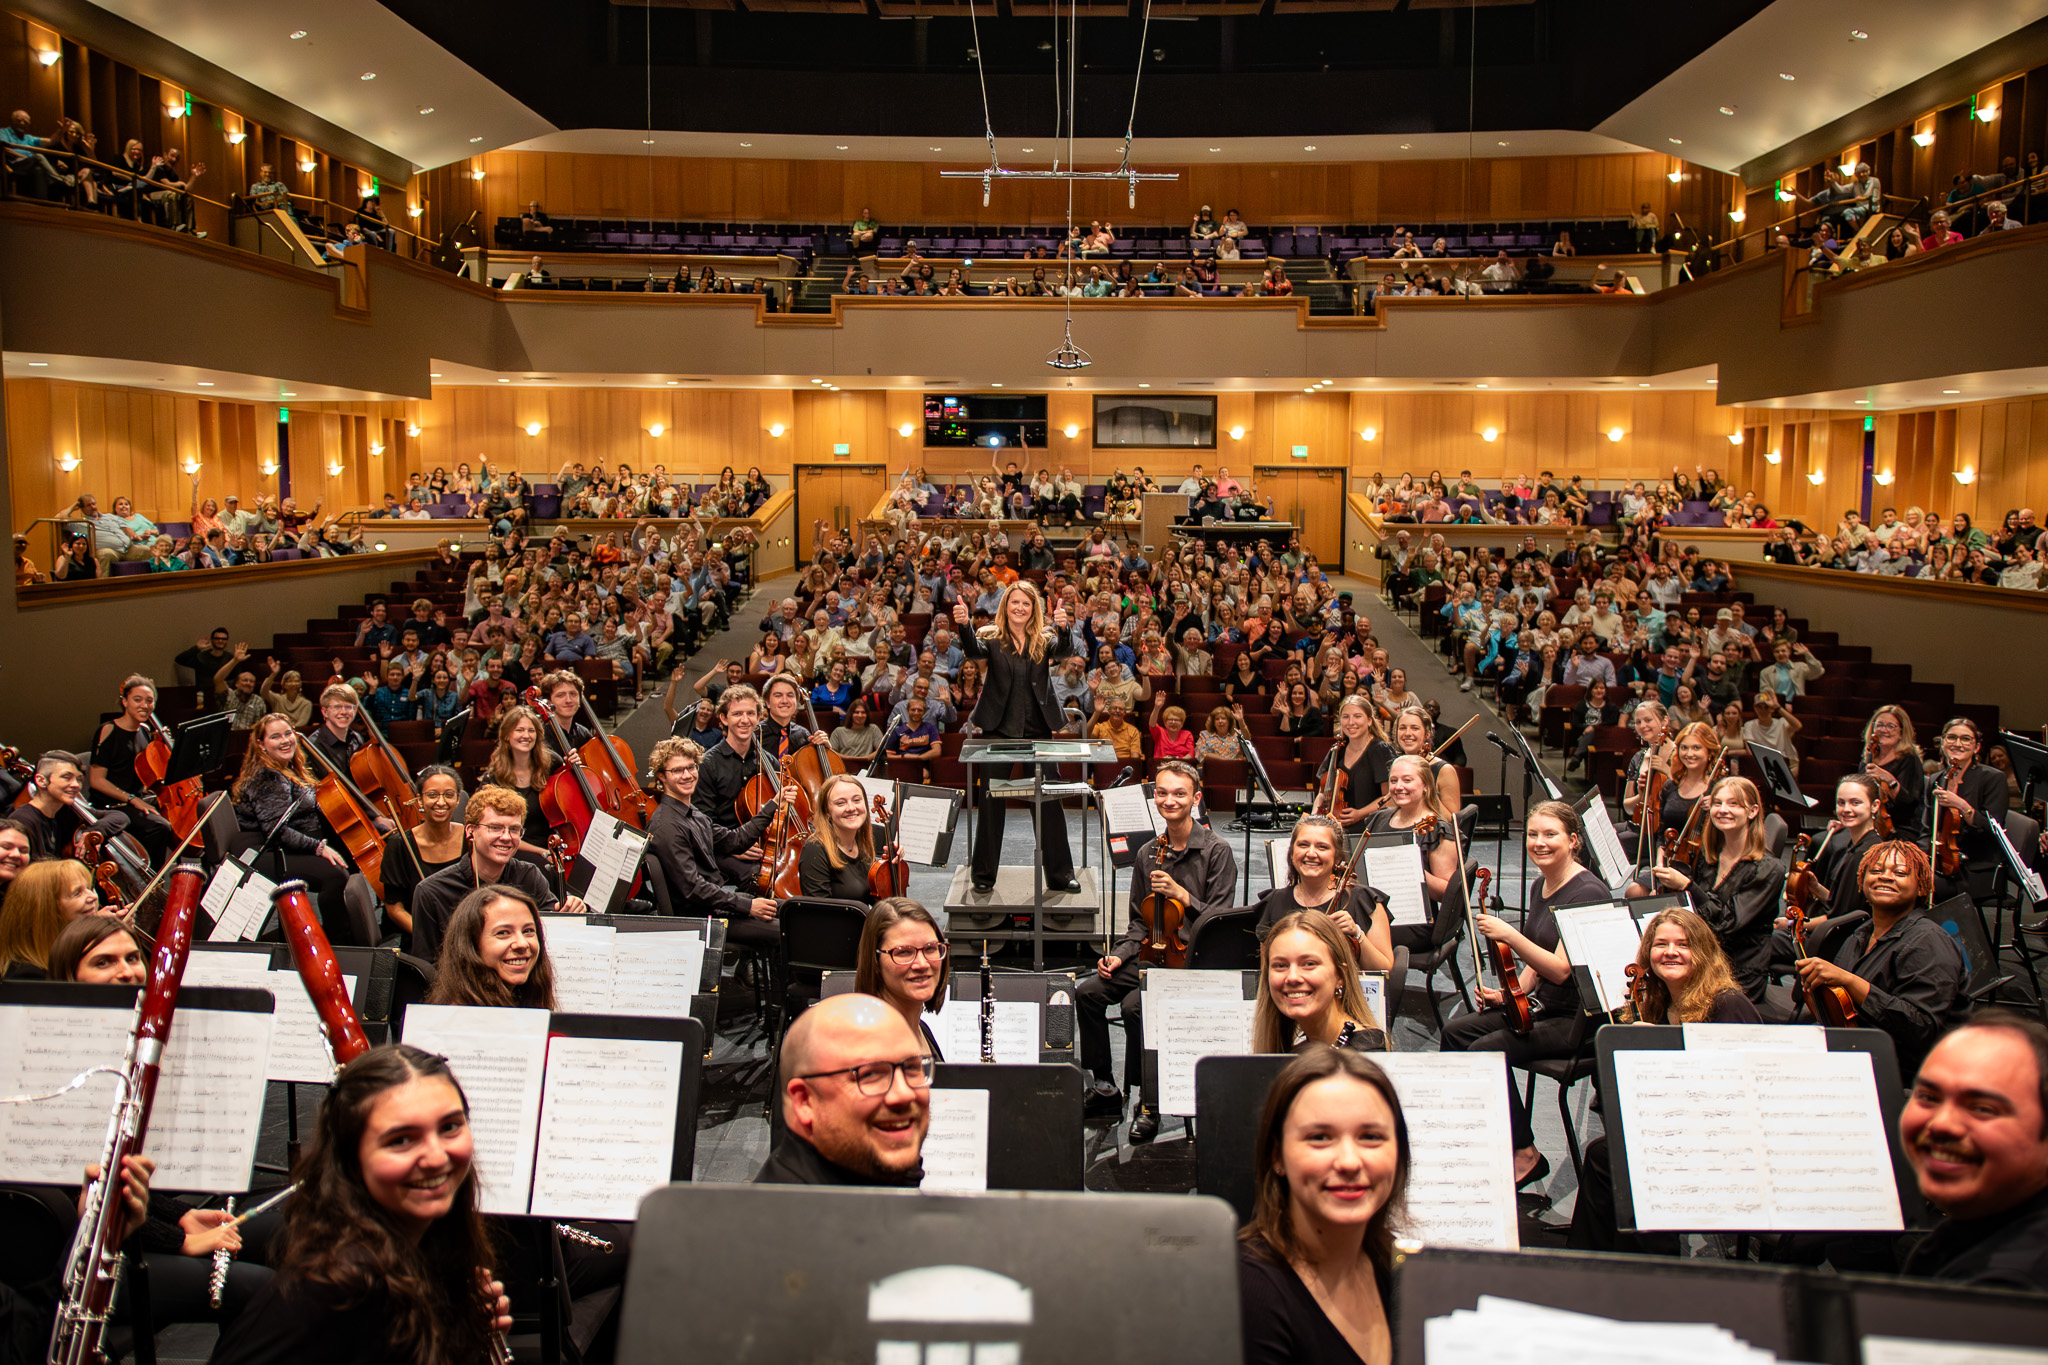 The CU Symphony Orchestra smiles for a selfie on stage with the Brooks Center audience waving in the background